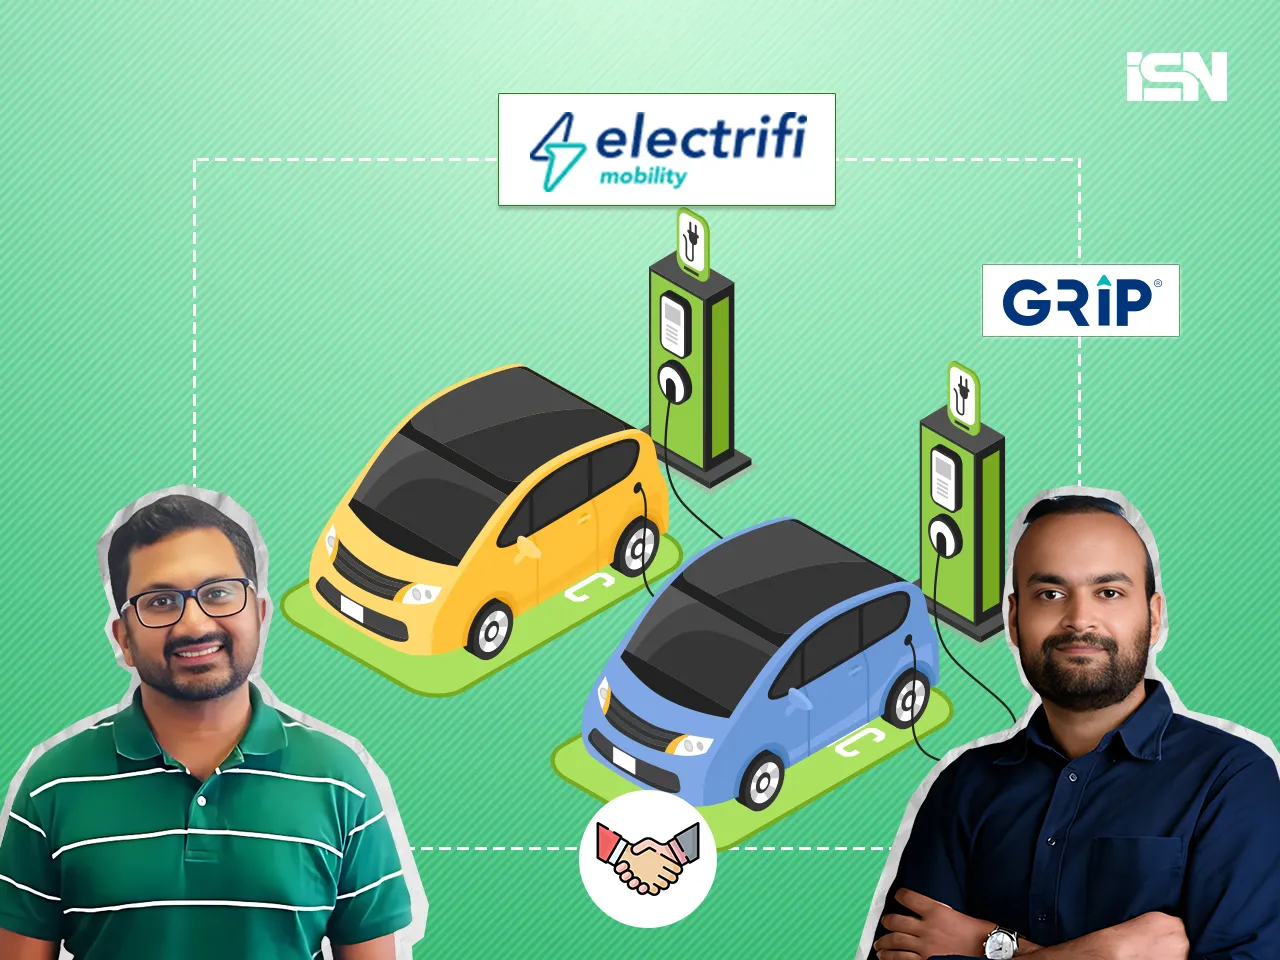 Kunal Mundra ex india ceo cars24 partners with Grip invest to launch electrifi mobility 2.jpg